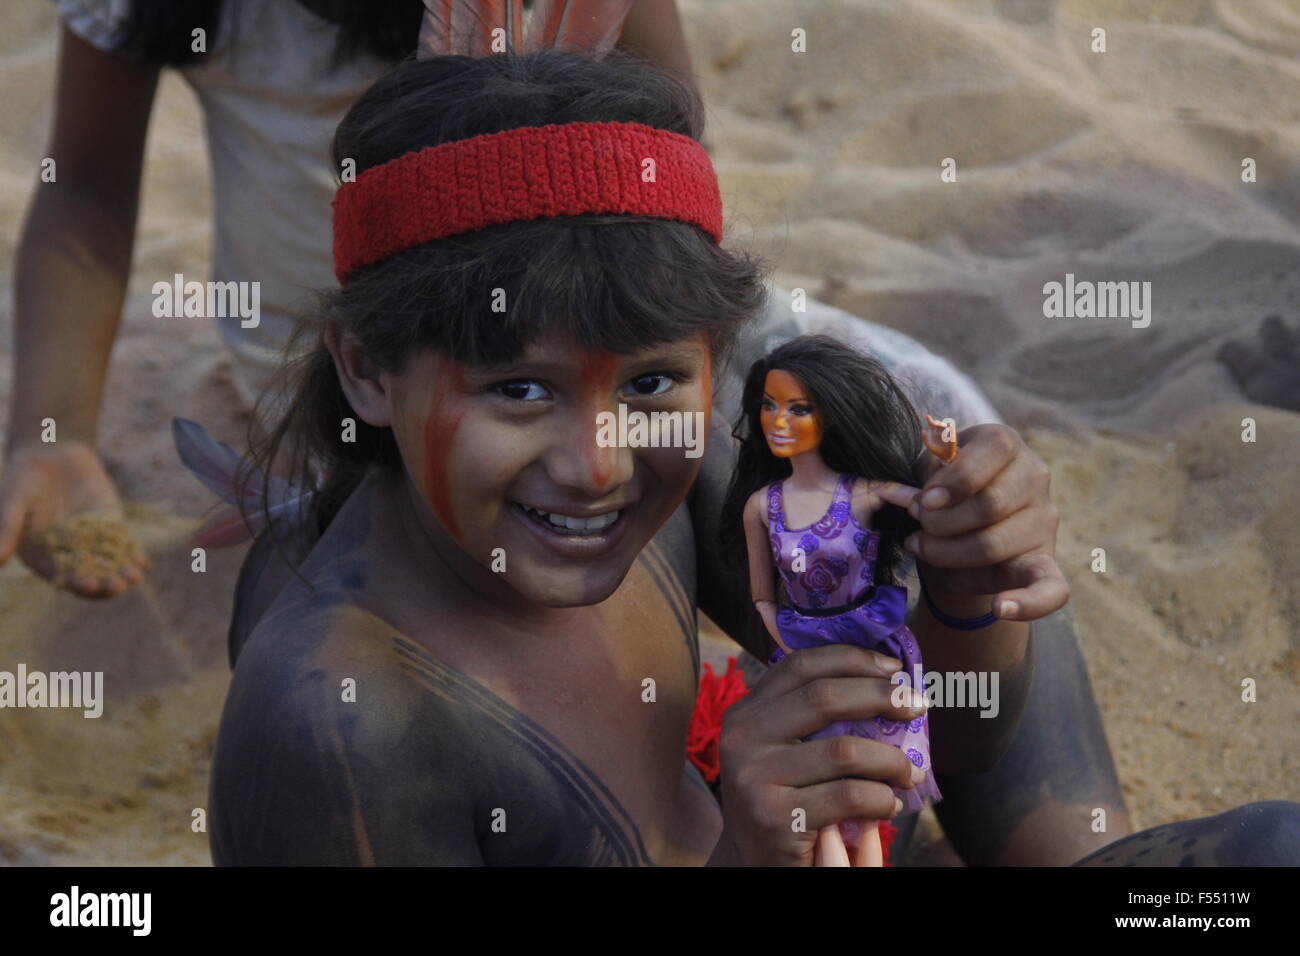 Palmas Brazil 27th Oct 2015 An Indigenous Girl Poses With Her Doll During The First World